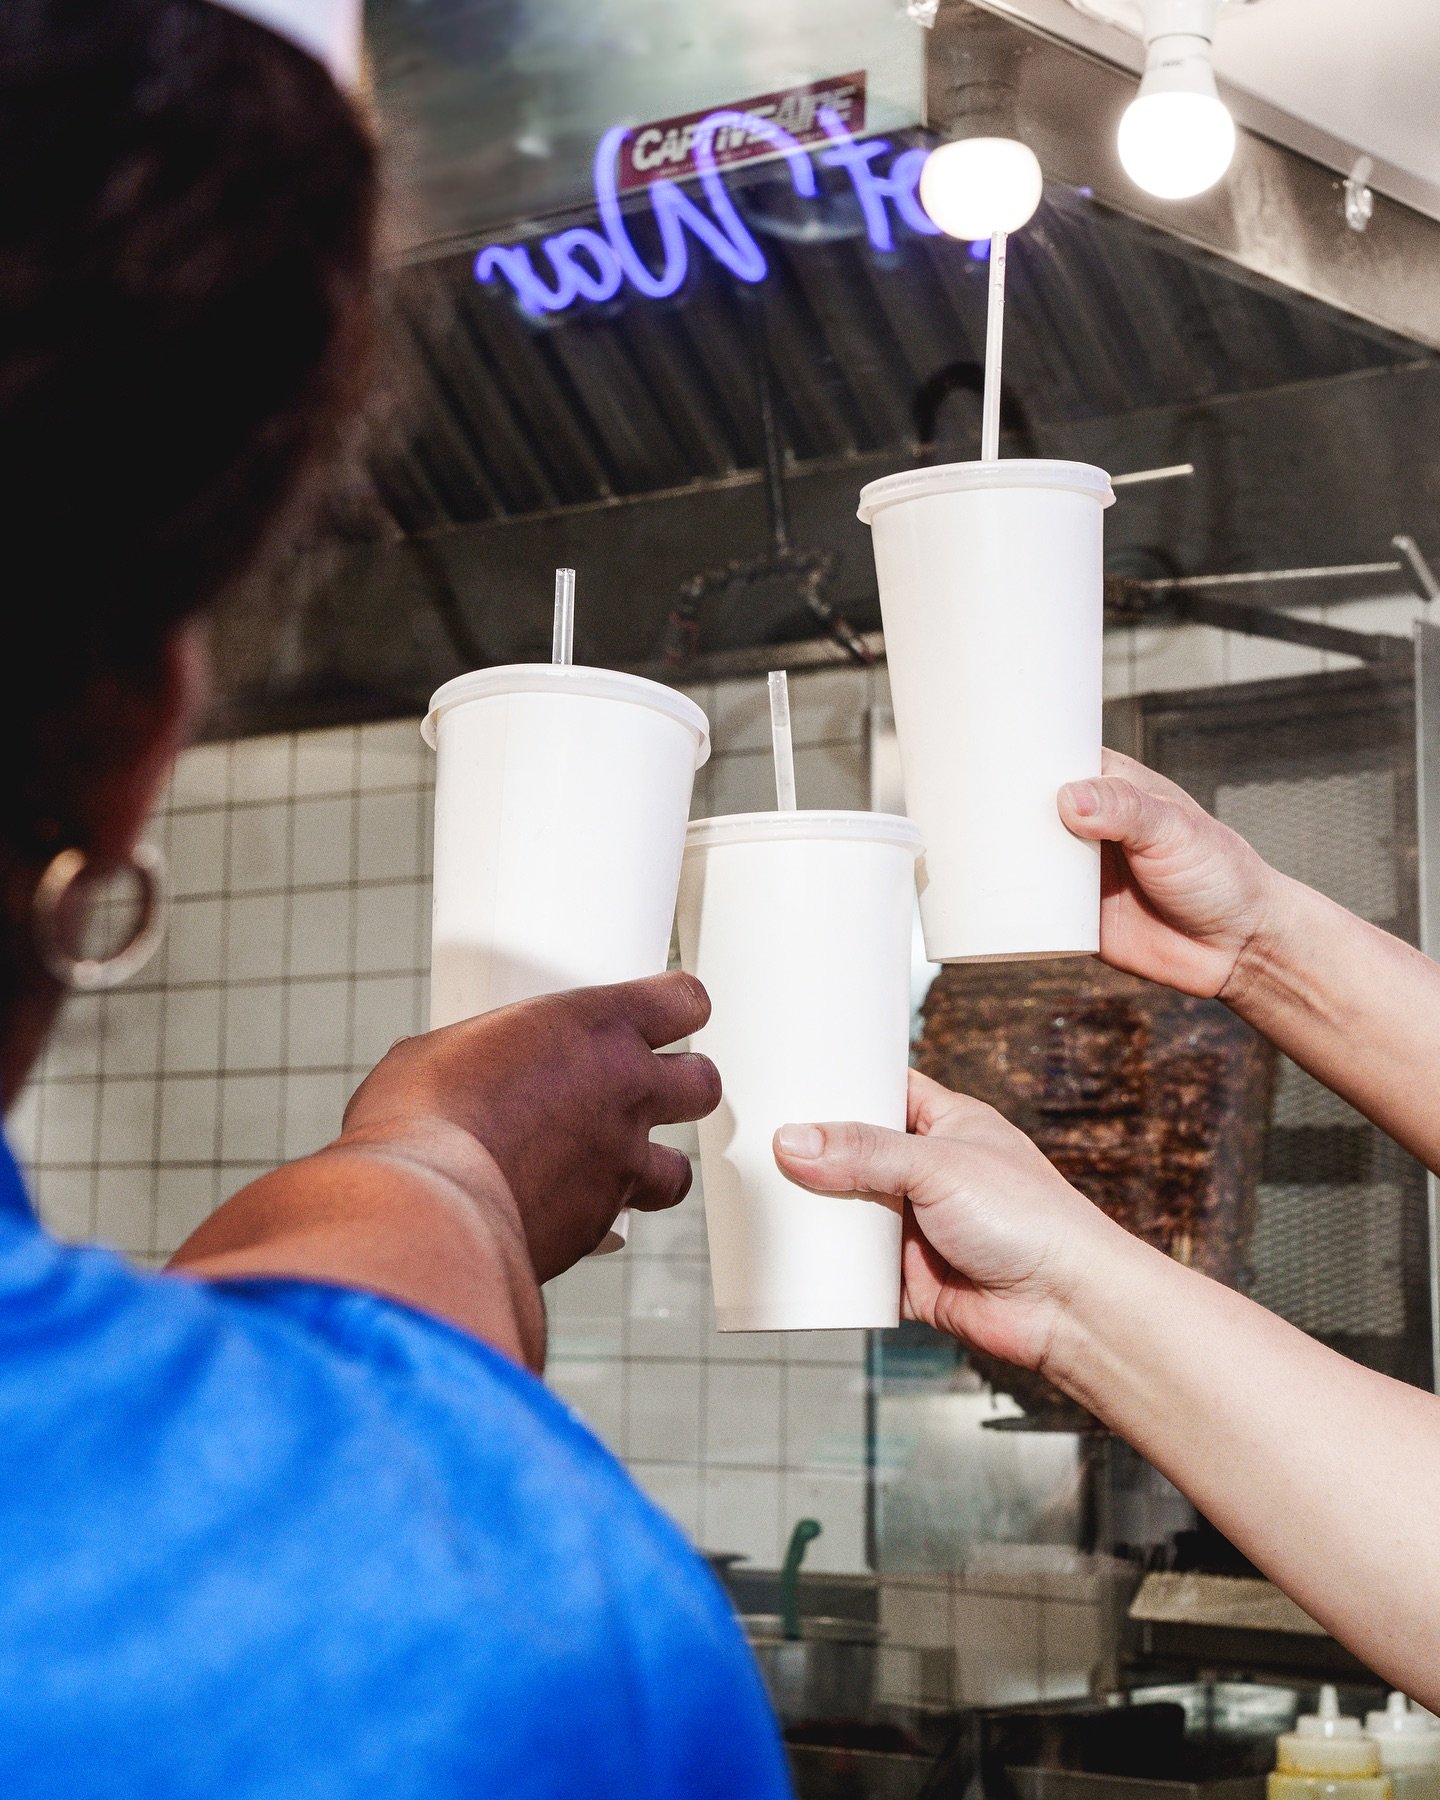 Cheers 🍻 to aguas frescas and good times ☀️

Join us for your favorite tacos, burritos, drinks, and more! 💙

Visit Taco Centro, located in Downtown San Diego&rsquo;s Gaslamp Quarter!

📍 539 Island Ave San Diego, CA

#tacocentrosd #tacotimesd 
&bul